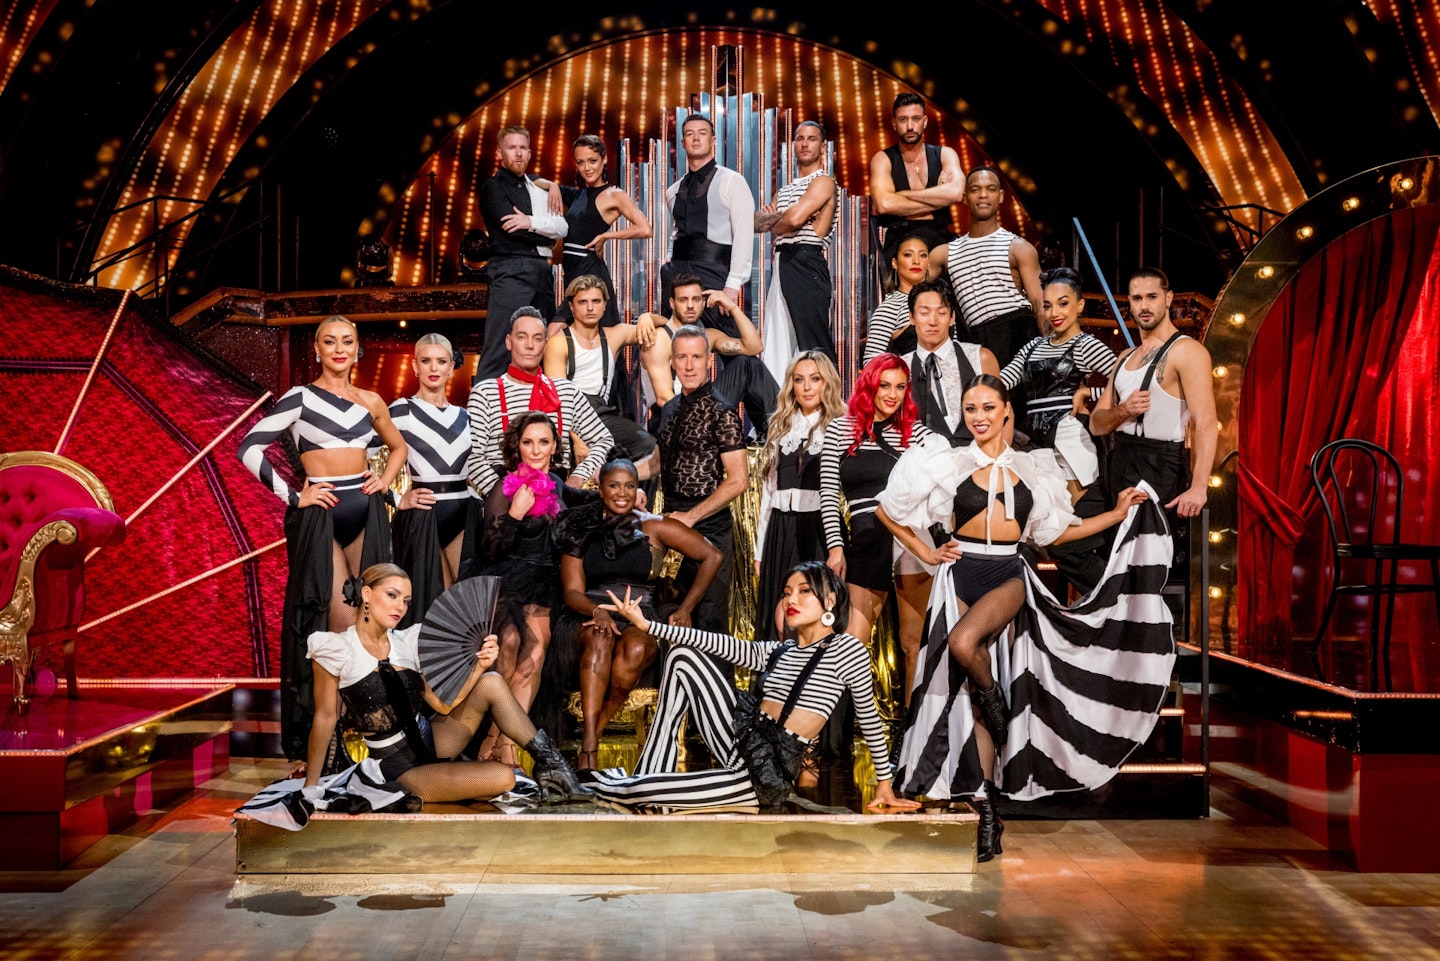 The Strictly professionals and judges